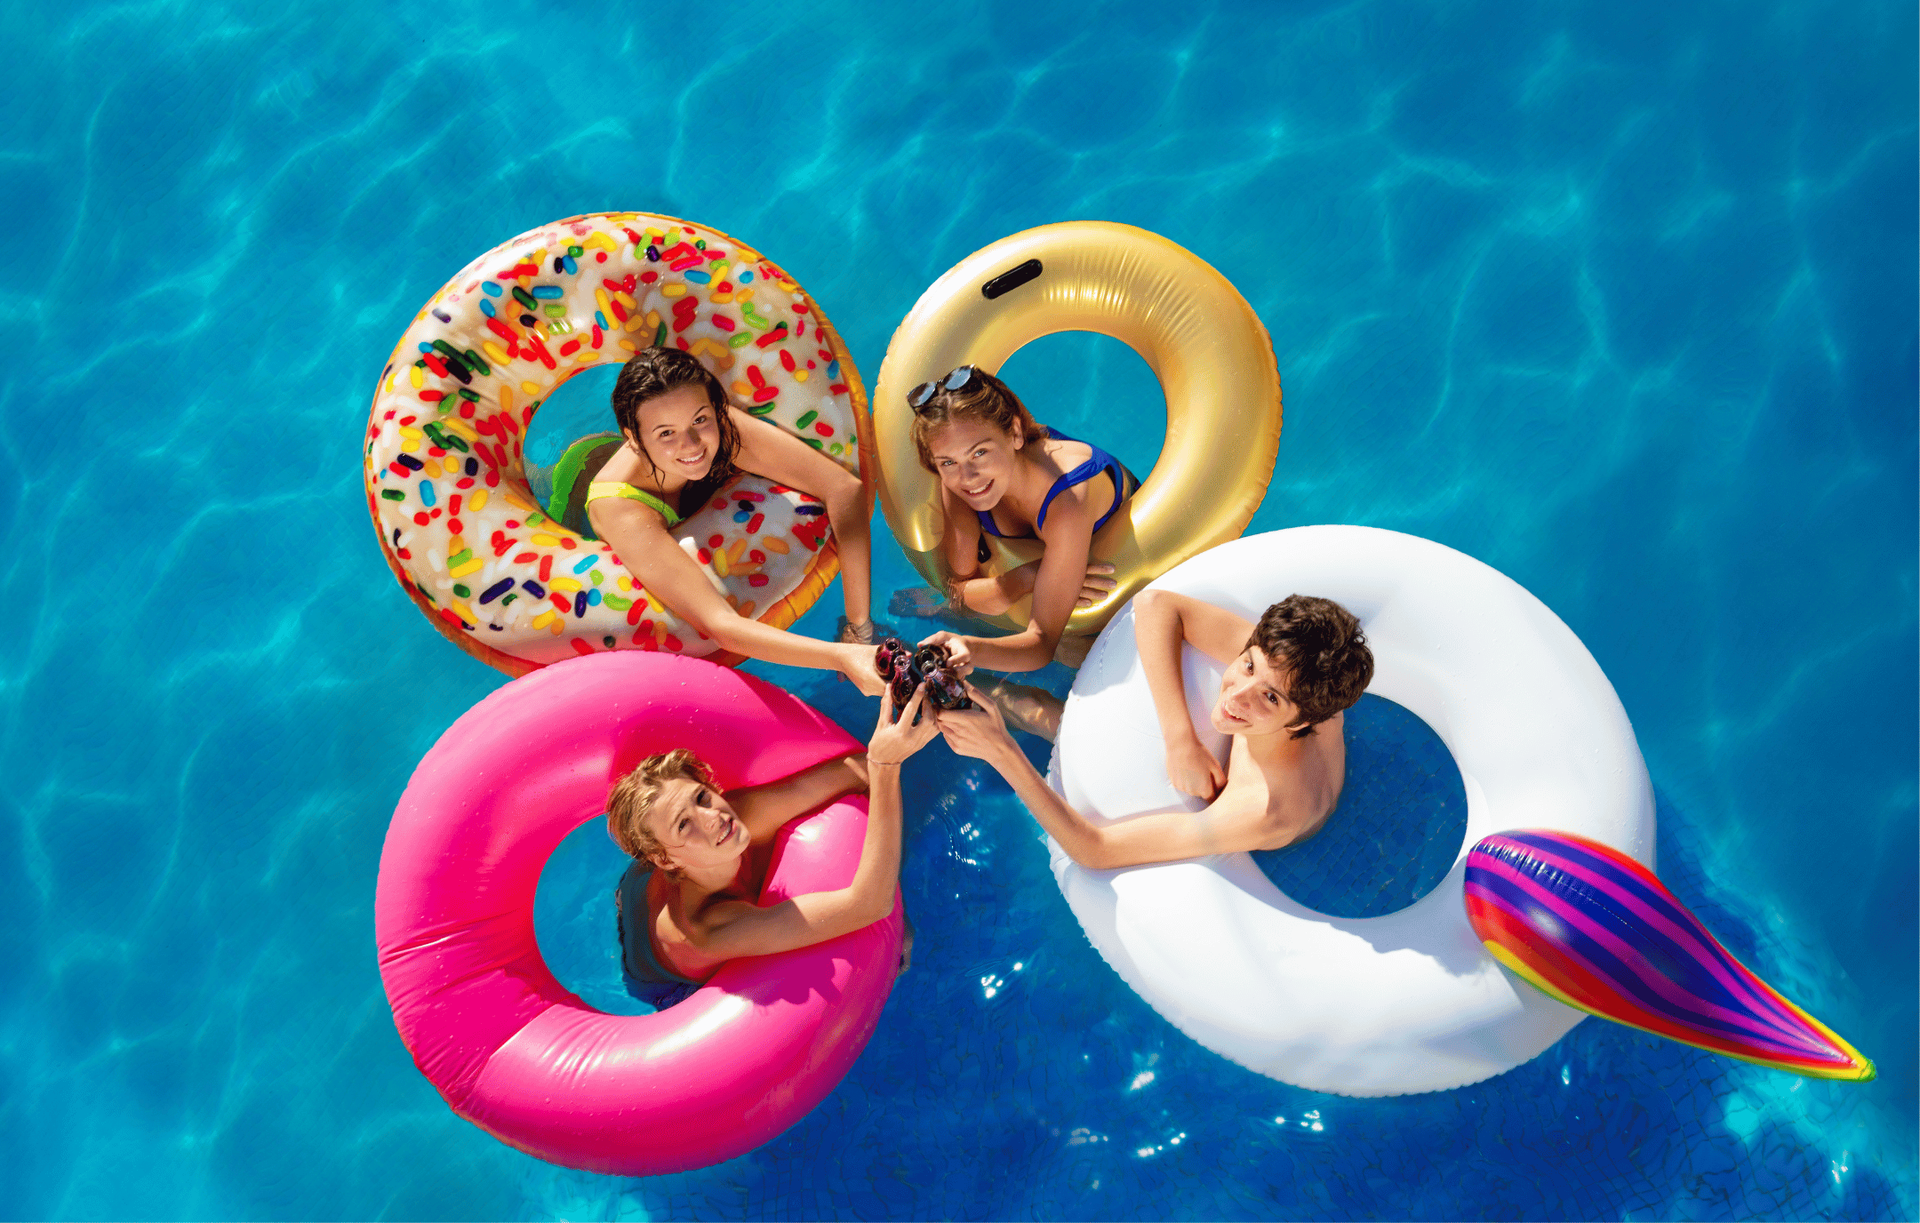 people-in-above-ground-pool-with-floats-shade.png__PID:467cec44-3752-40d5-9d26-10b419bd0c03